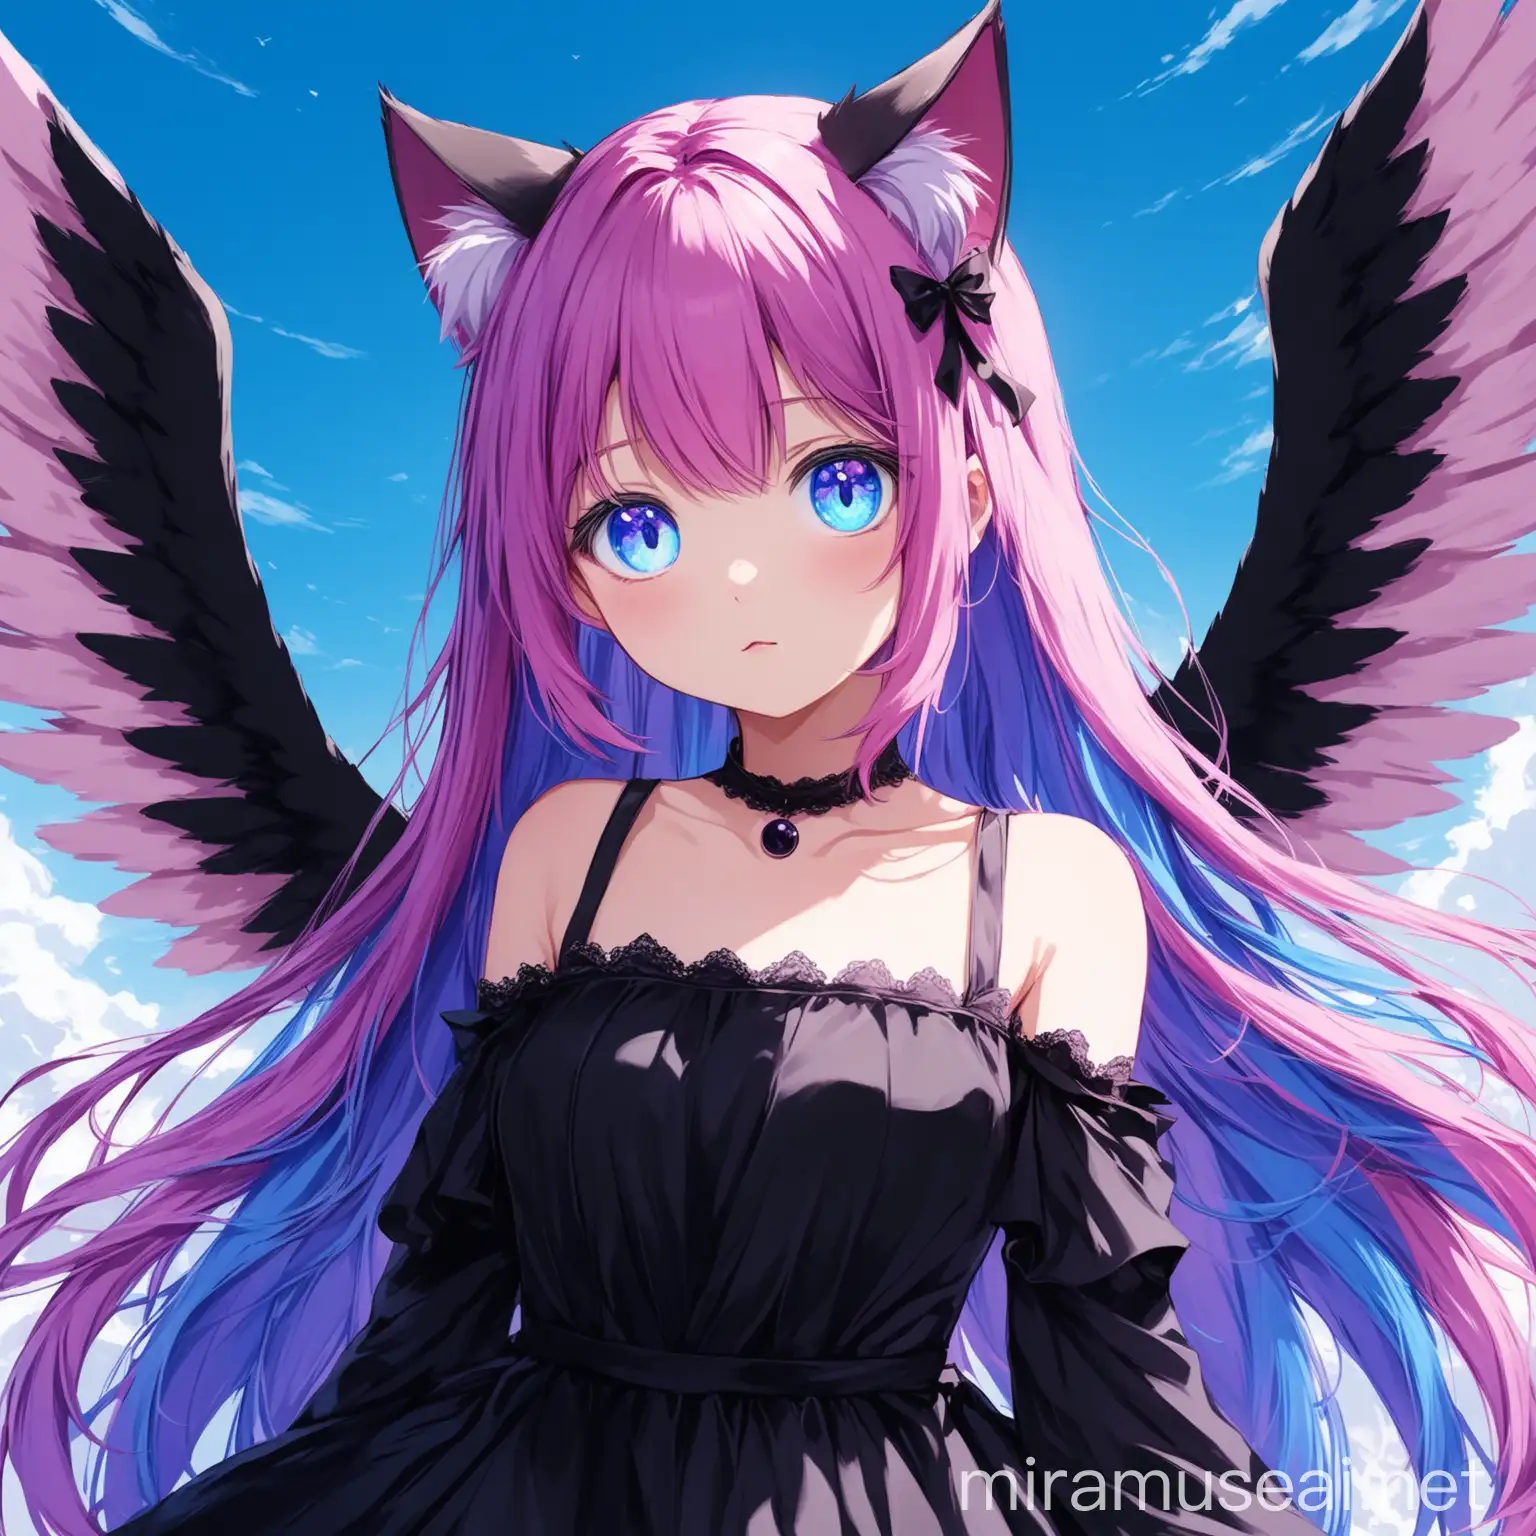 Mystical Girl with PurplePink Hair and Wings in Black Dress